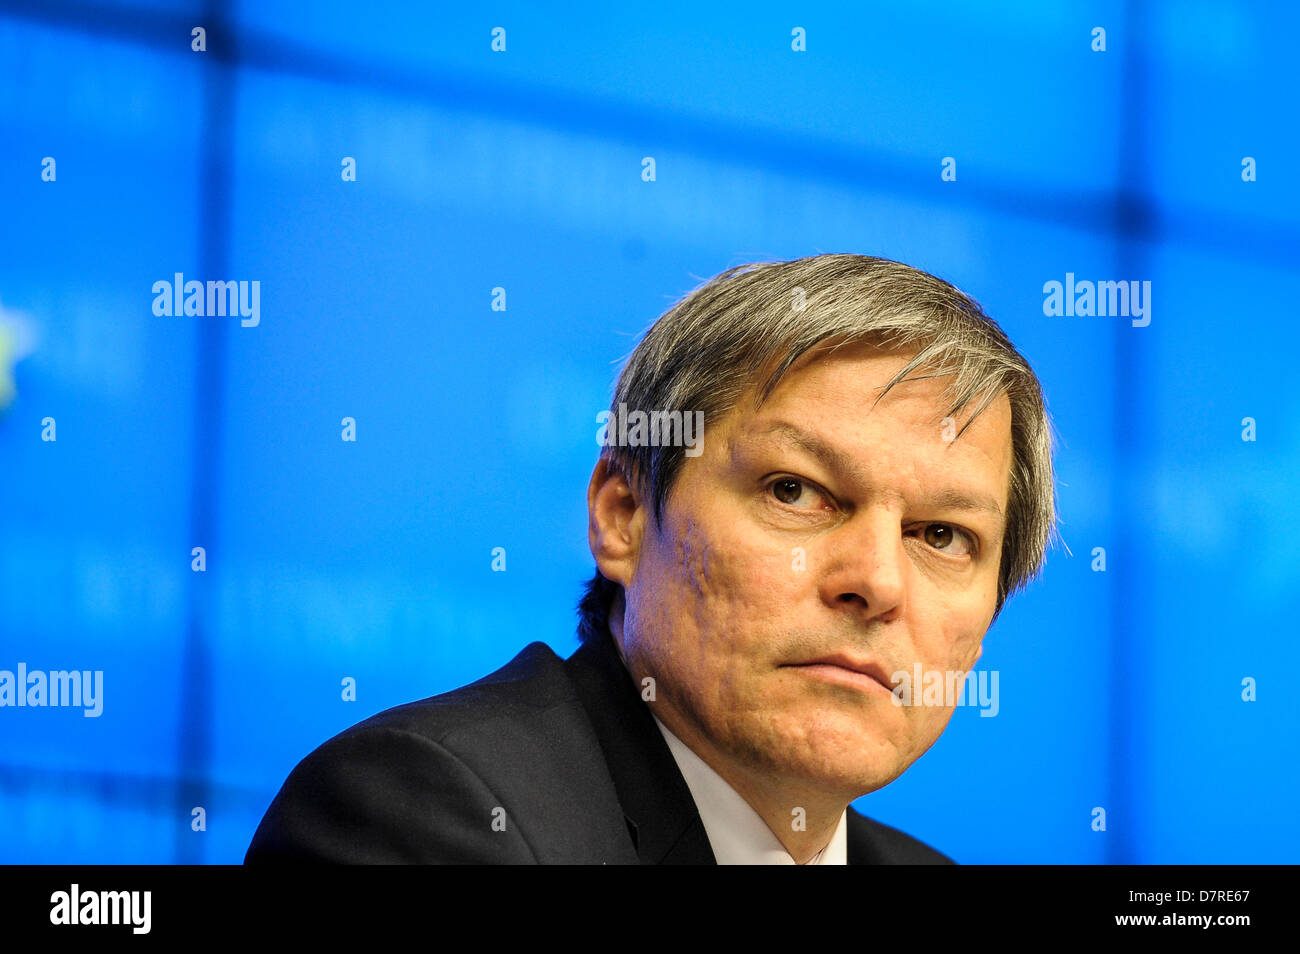 Brussels, Belgium. 13th May, 2013. Dacian Ciolos, the European Commissioner for Agriculture and Rural Development  speak during press conference after   Agriculture and Fisheries council at the EU Headquarters  in Brussels, Belgium on 13.05.2013 Fisheries ministers meet  to revise their position on the reform of EU fishing rules. The reluctance of some countries, including France, Spain and Poland, to find common ground with the Parliament on key issues of the reform is threatening to cause the collapse of negotiations on a new Common Fisheries Policy (CFP).  by Wiktor Dabkowski (Credit I Stock Photo